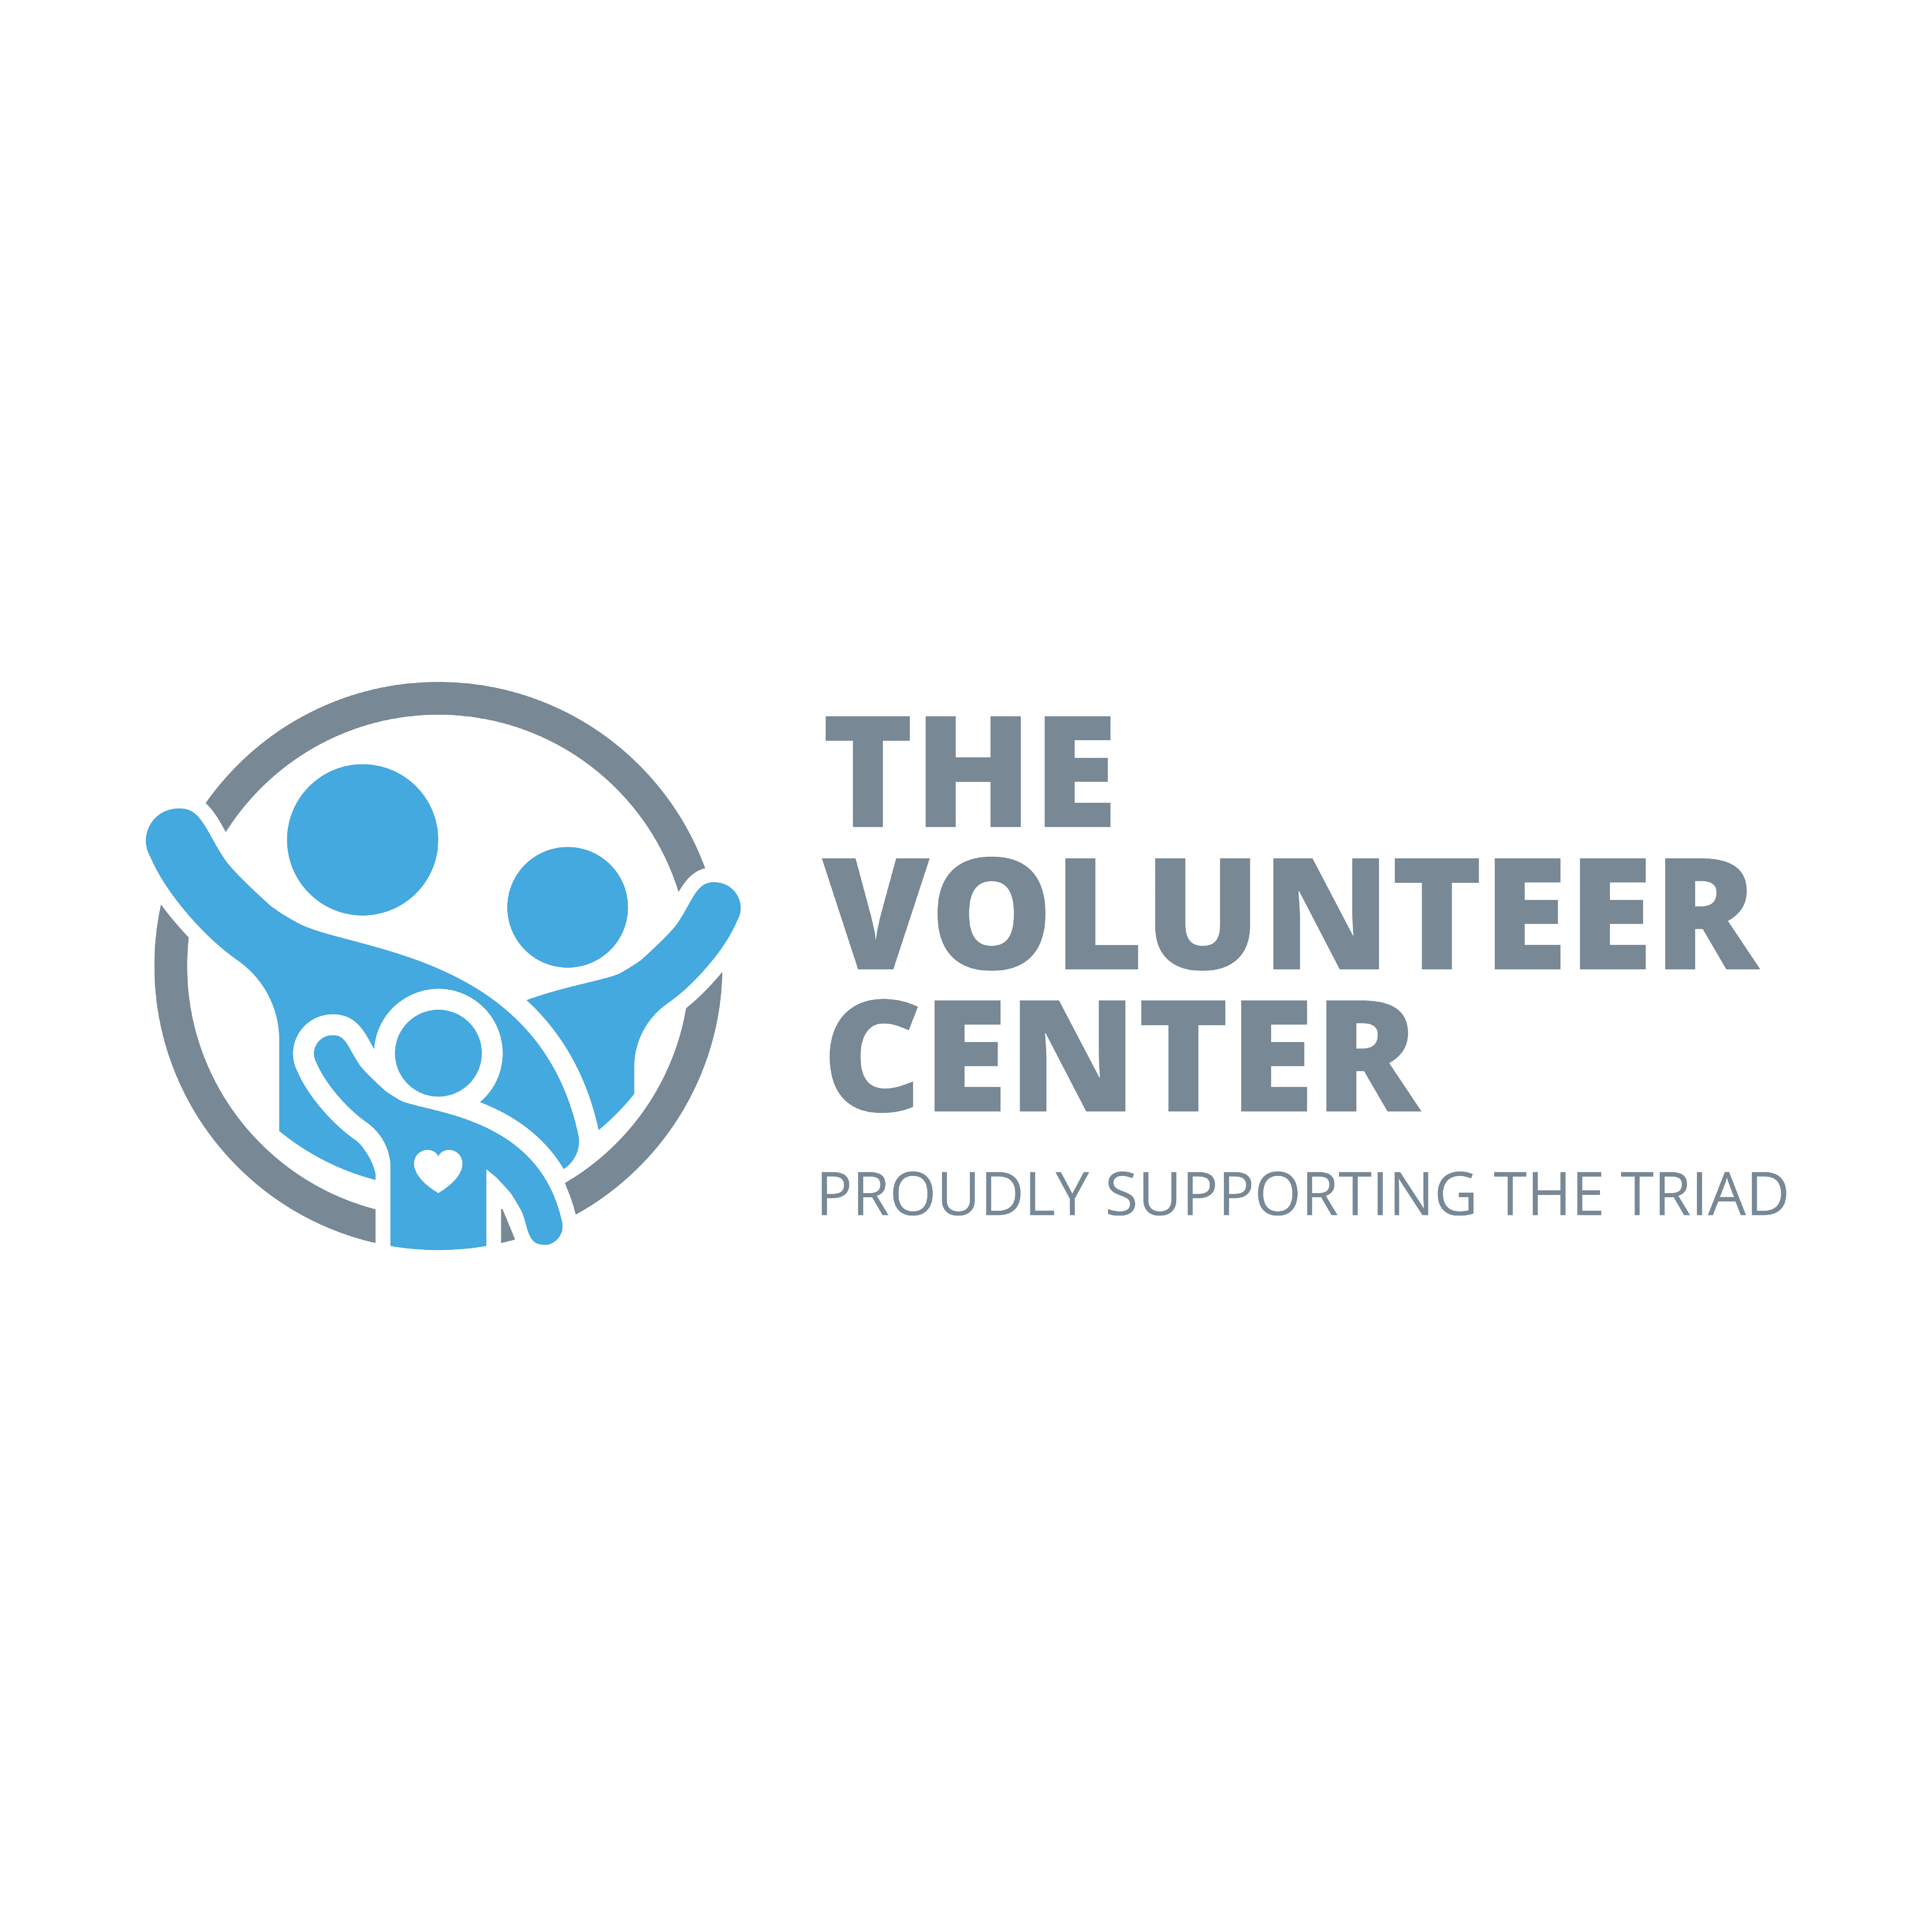 The Volunteer Center: Proudly Supporting the Triad